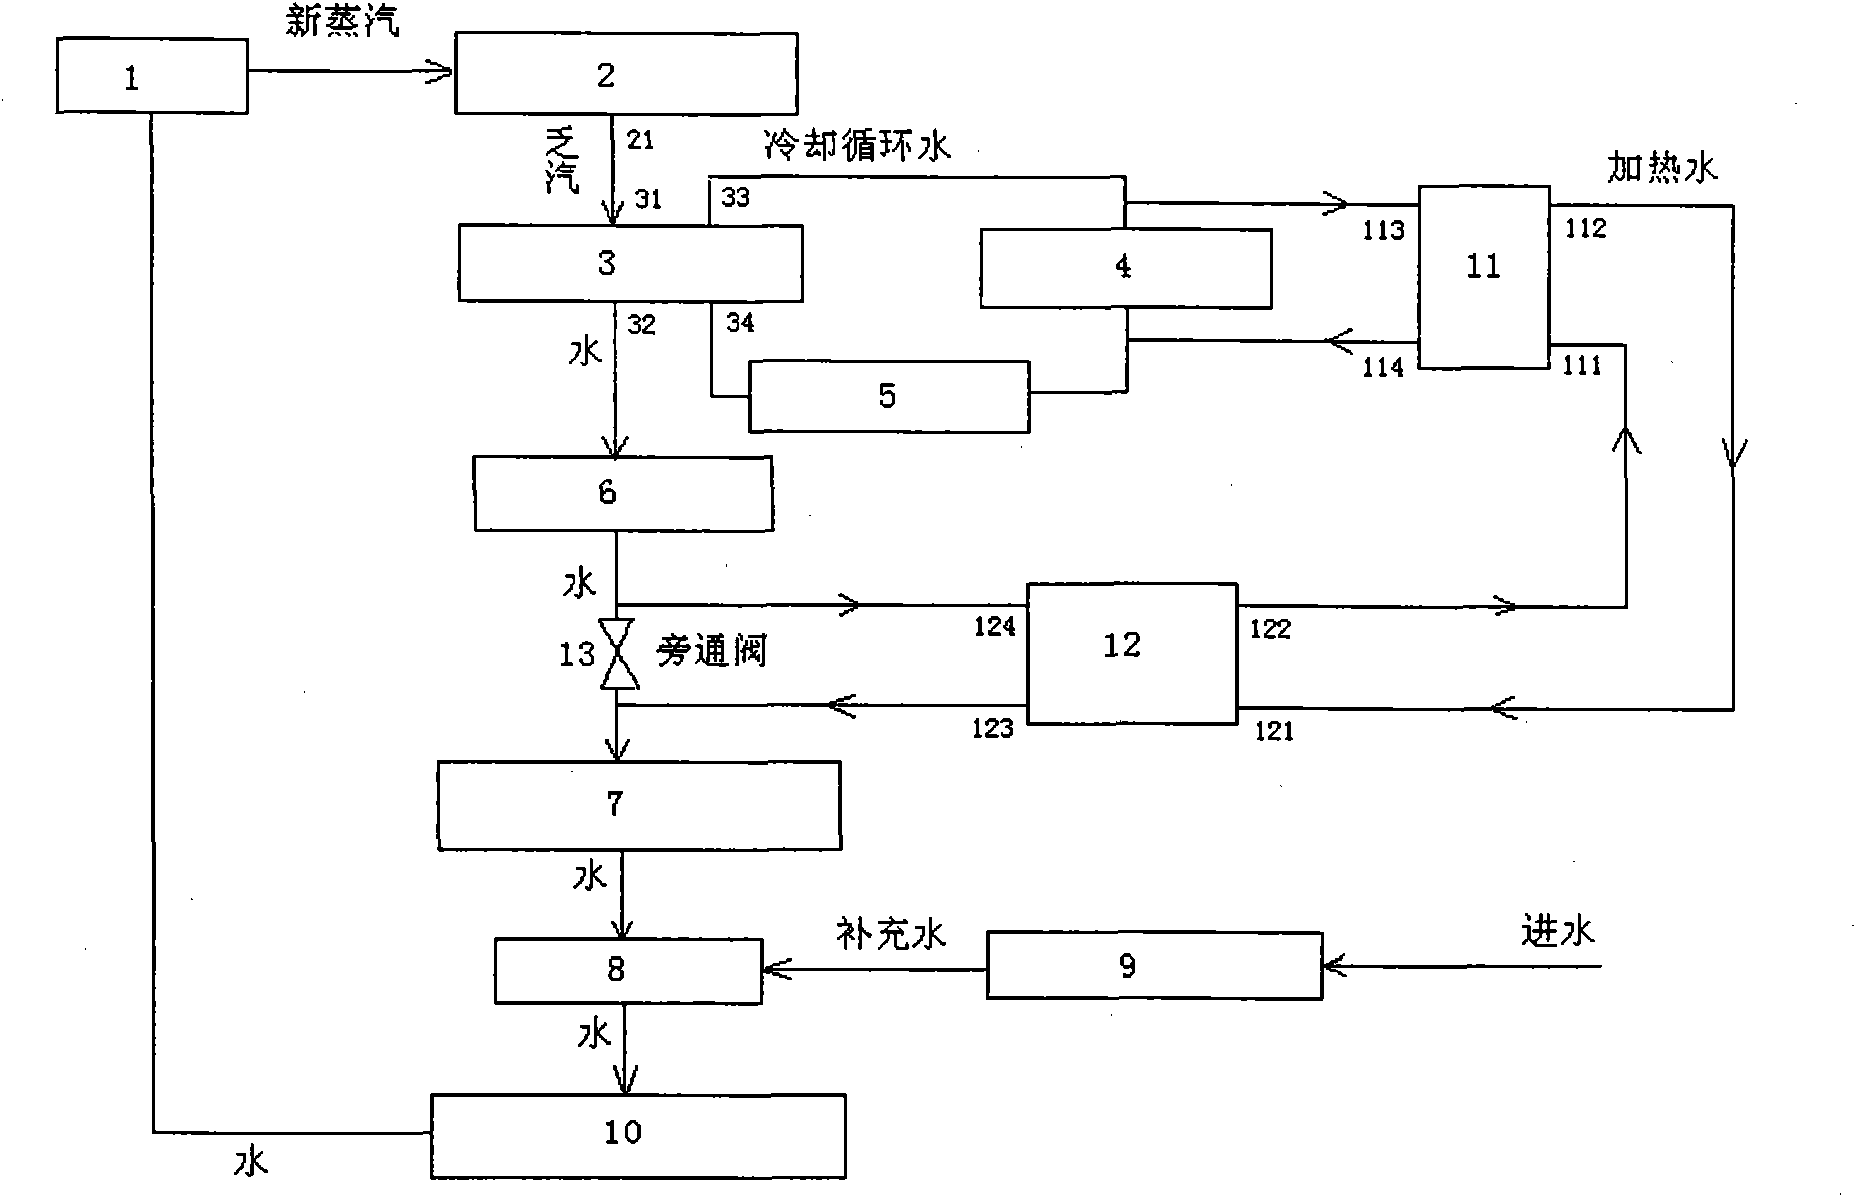 System for supplying heat and heating condensate water by extracting residual heat of power plant through heat pump